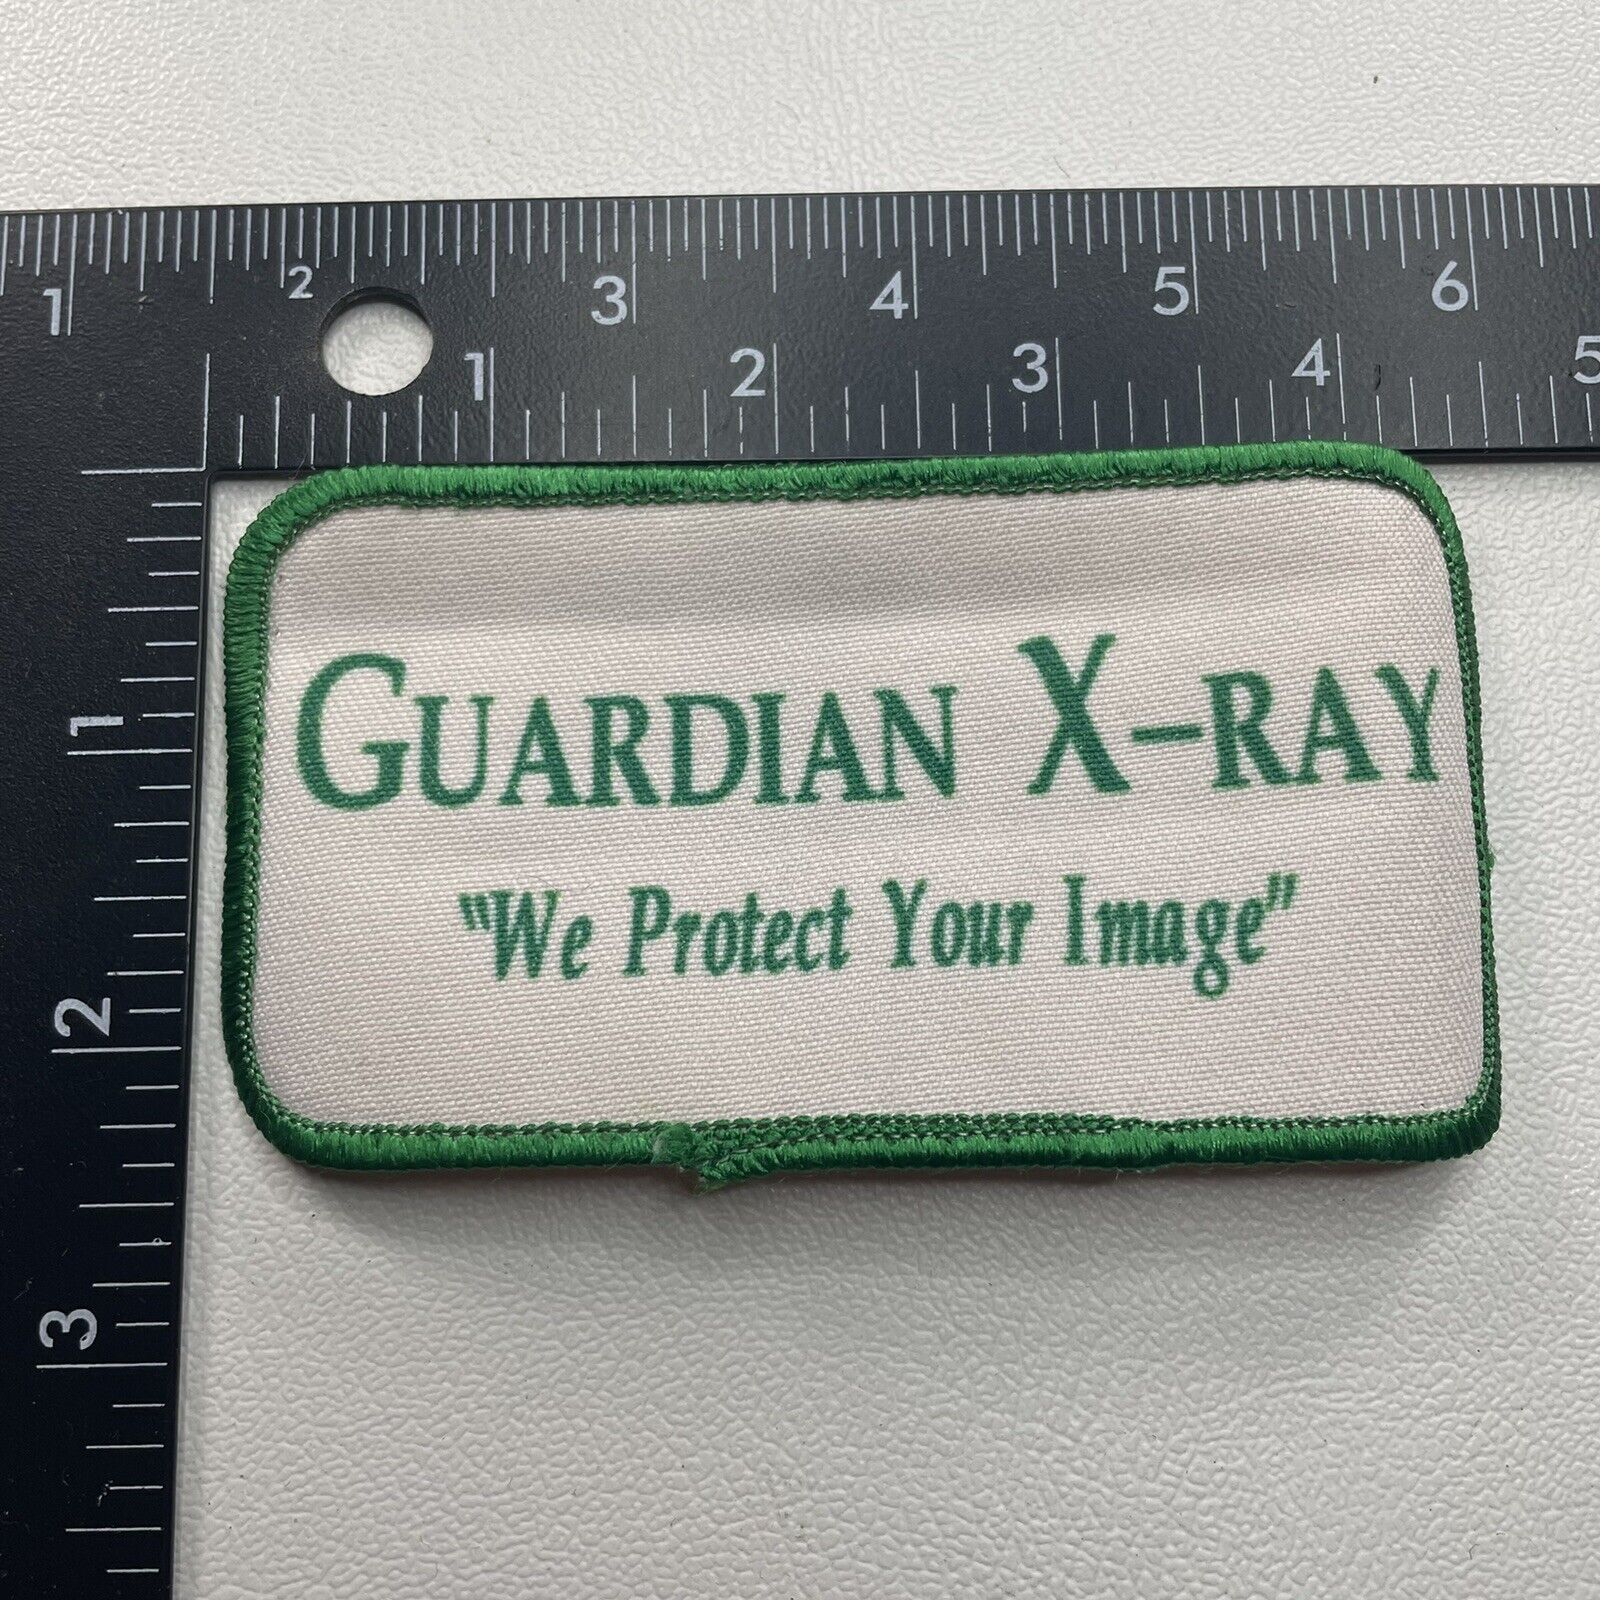 Kinda Curled GUARDIAN X-RAY WE PROTECT YOUR IMAGE Advertising Patch O23I